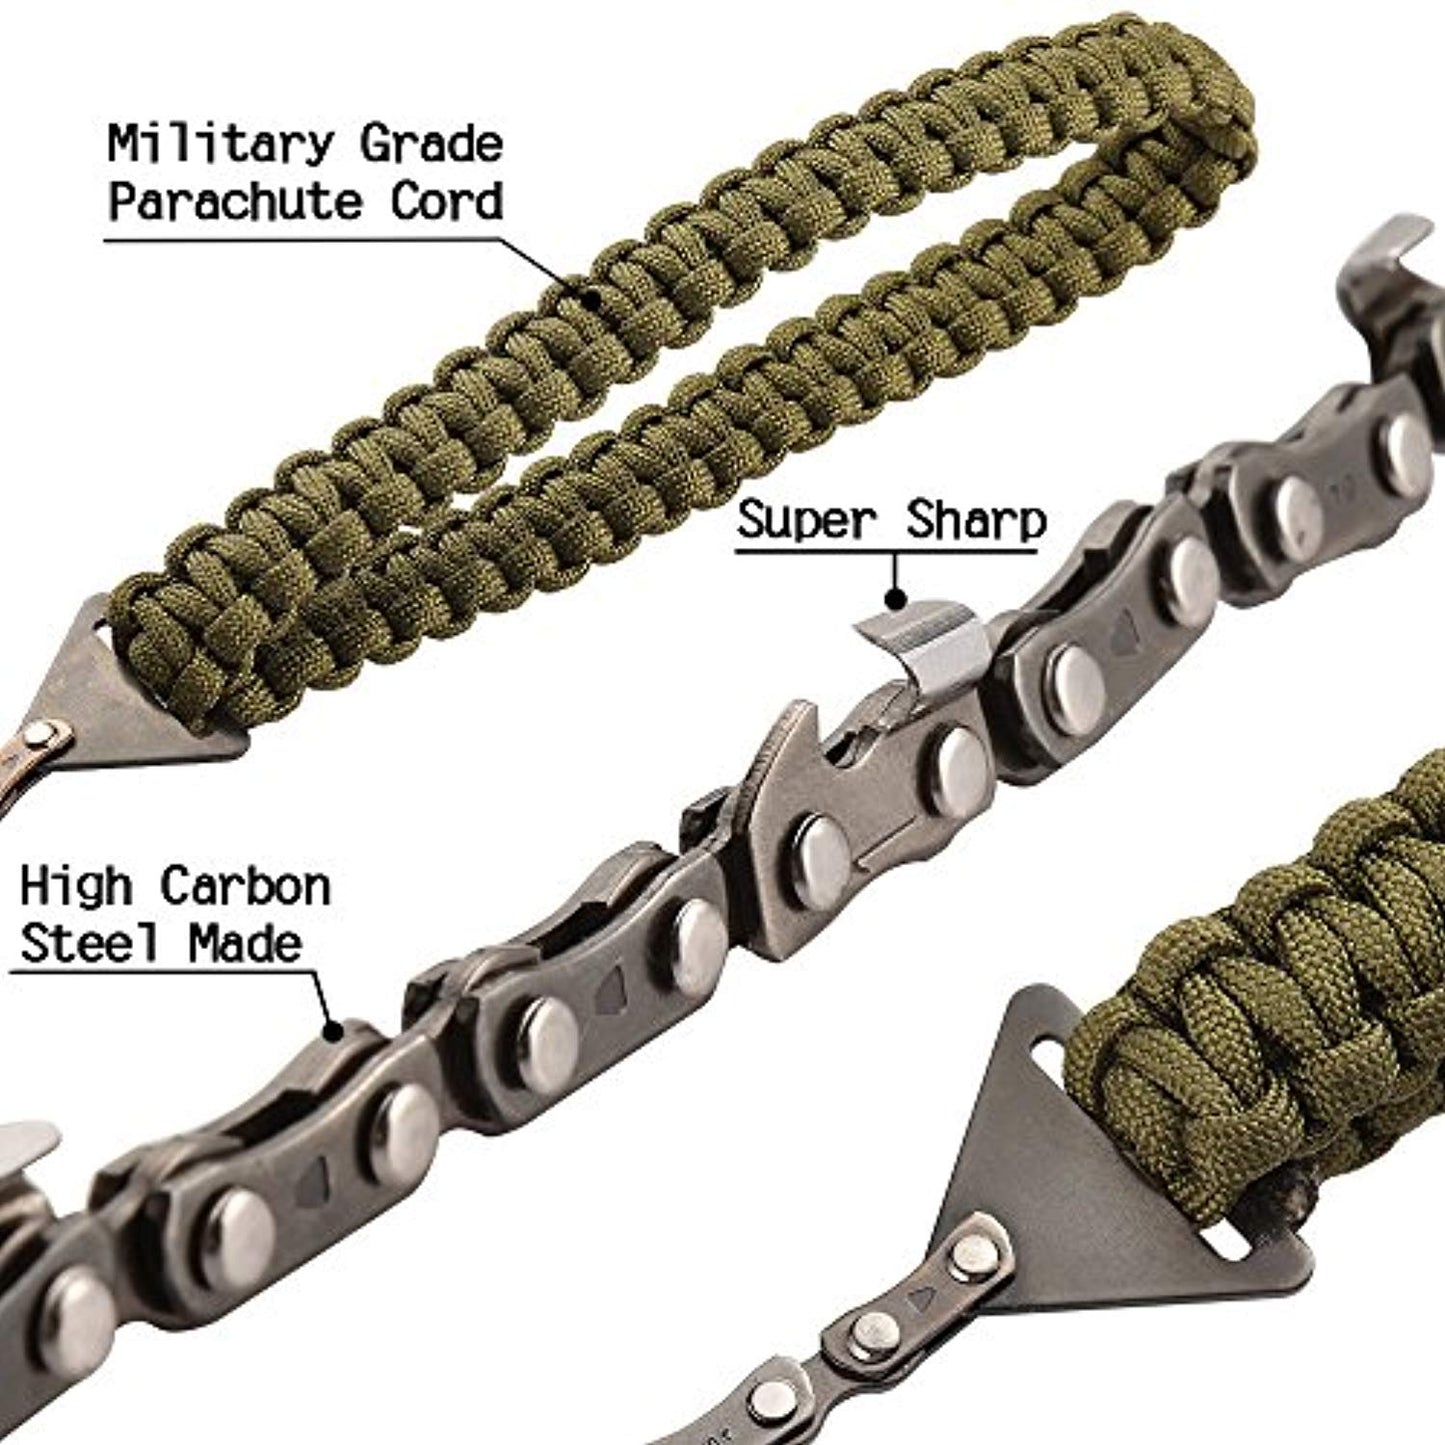 Pocket Chainsaw with Paracord Handle (24inch-11teeth) / (36inch-16teeth) Emergency Outdoor Survival Gear Folding Chain Hand Saw Fast Wood & Tree Cutting Best for Camping Backpacking Hiking Hunting - Ranger Rags